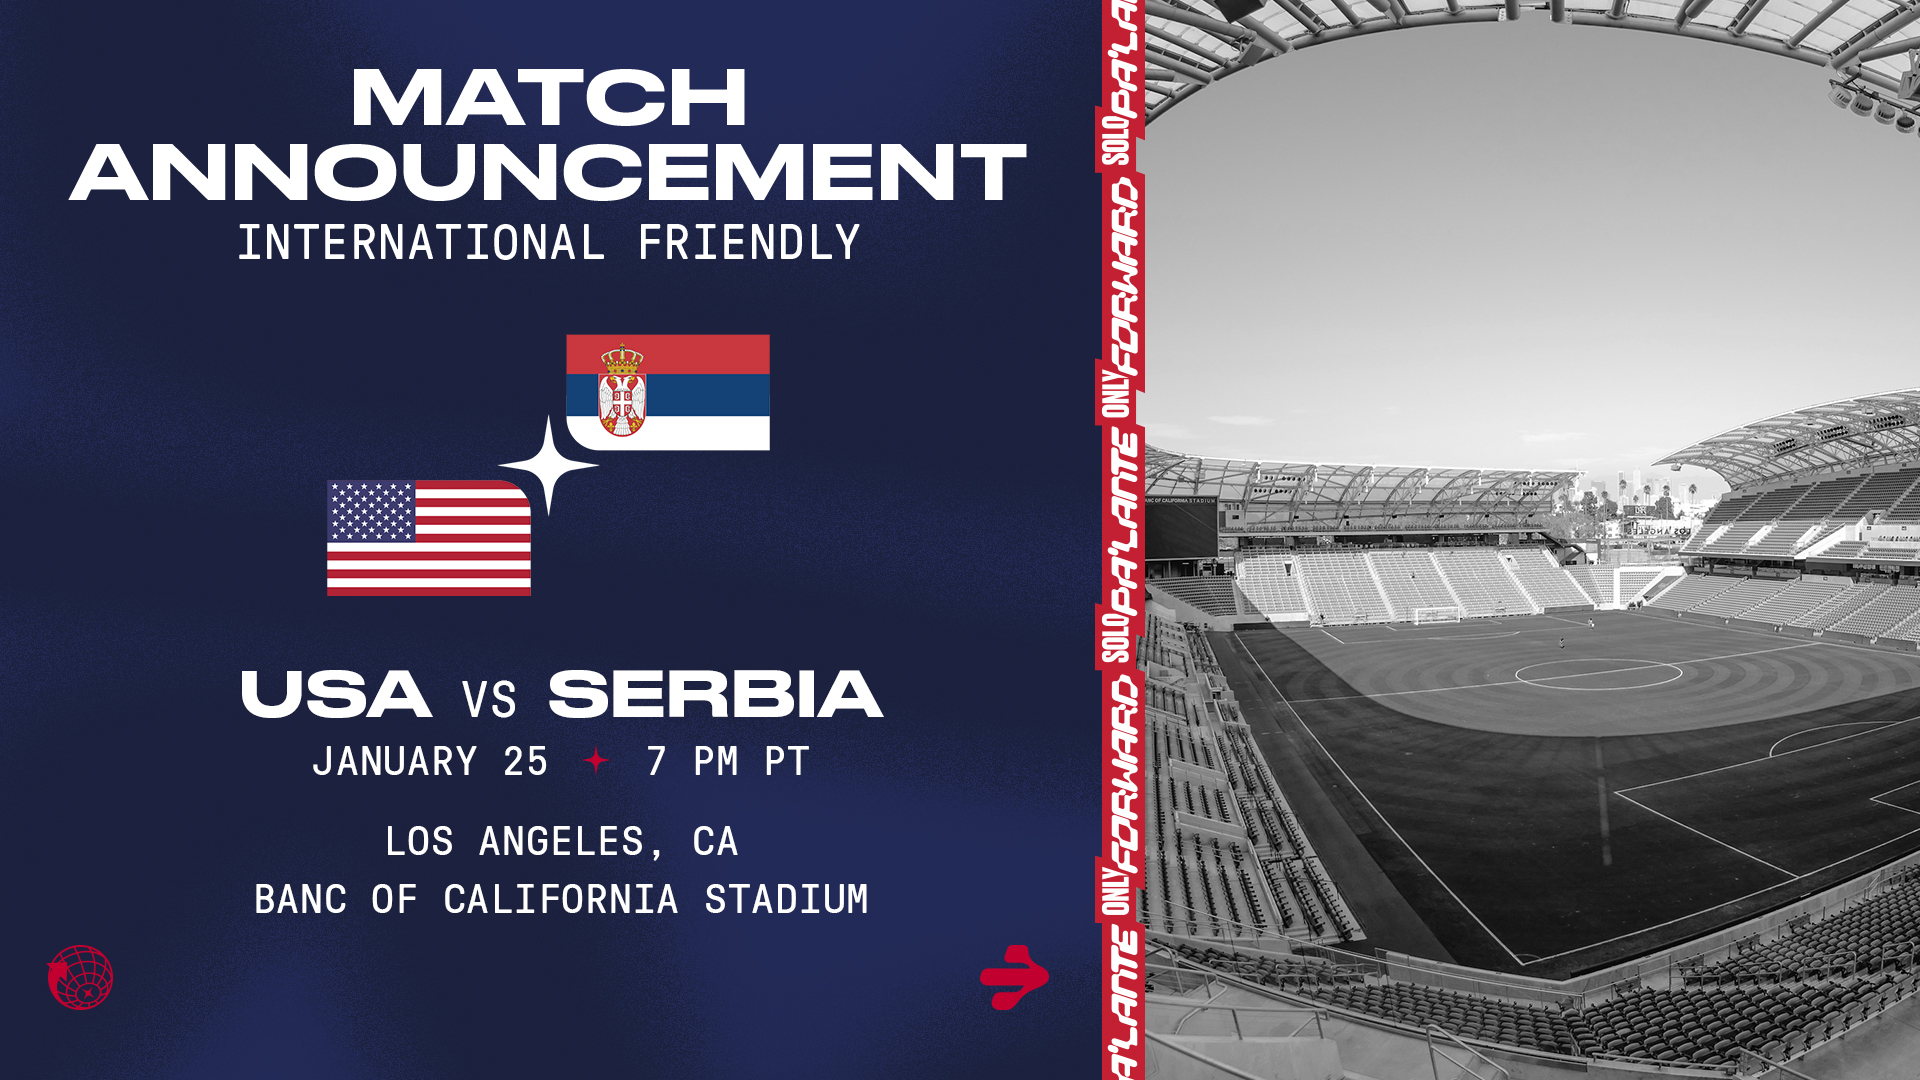 USMNT HEADS TO LOS ANGELES AREA TO KICK OFF 2023 AGAINST SERBIA ON